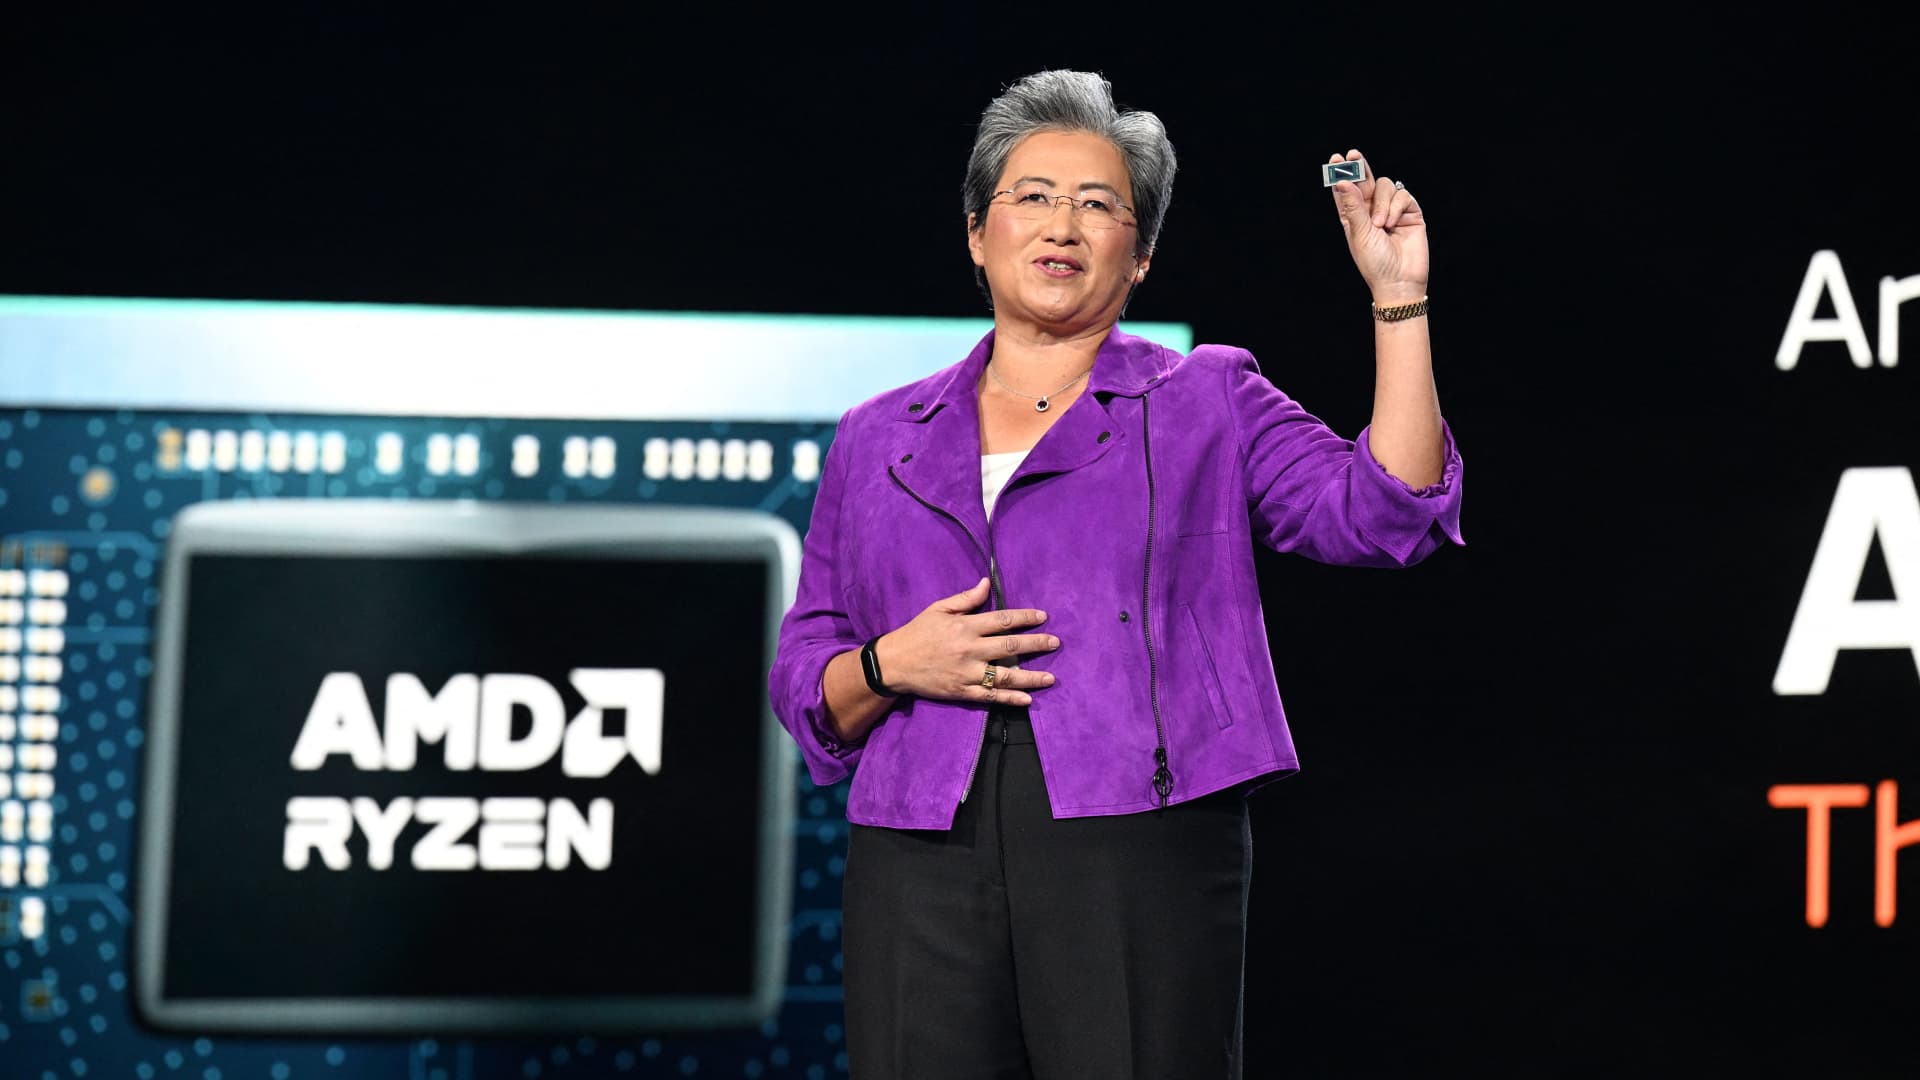 Chip stocks rally on optimistic AMD earnings and Fed’s signal that inflation is easing